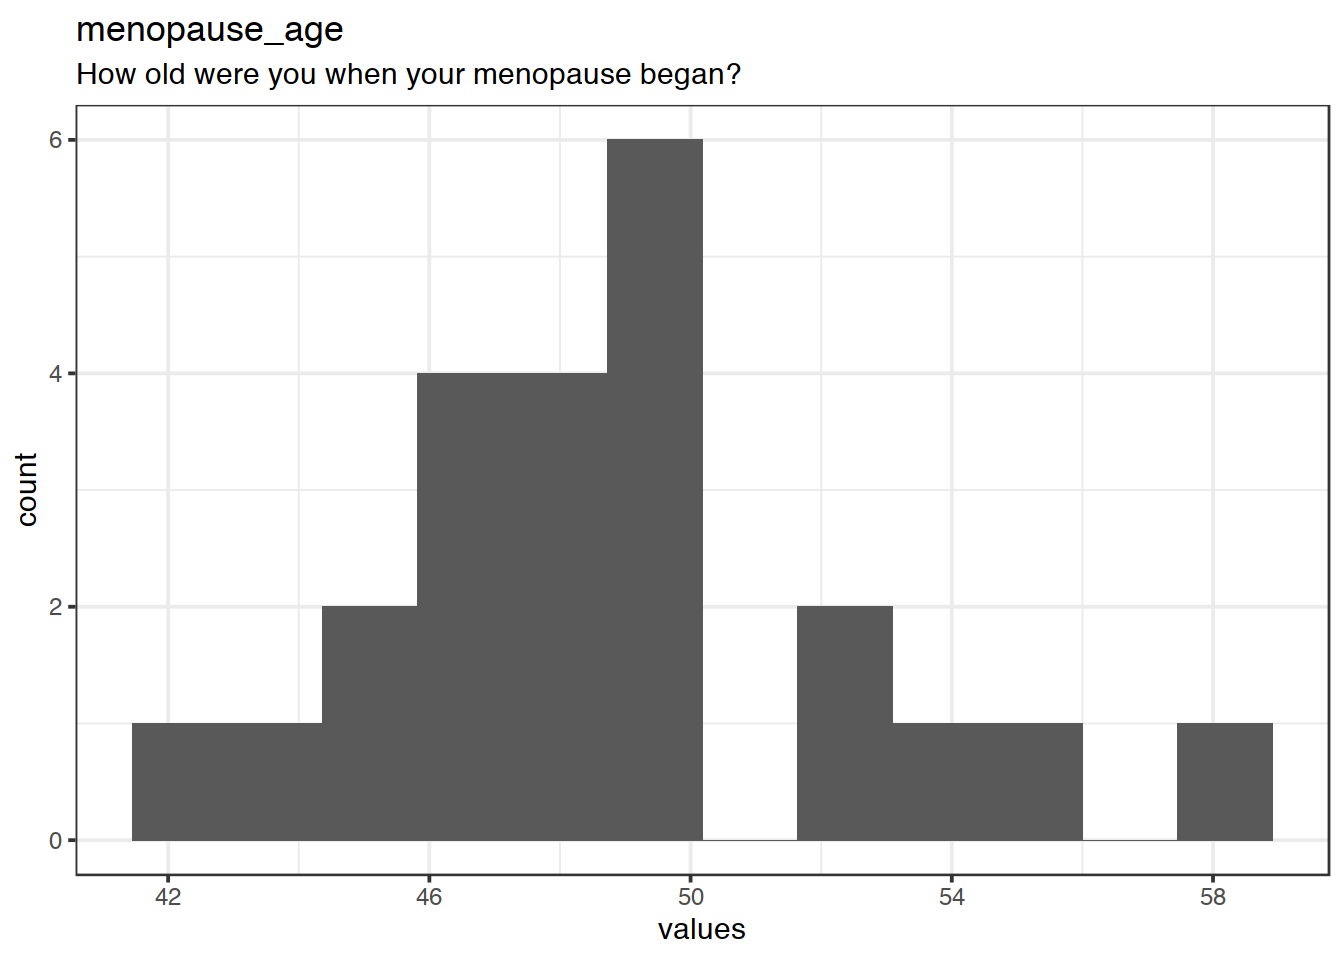 Distribution of values for menopause_age